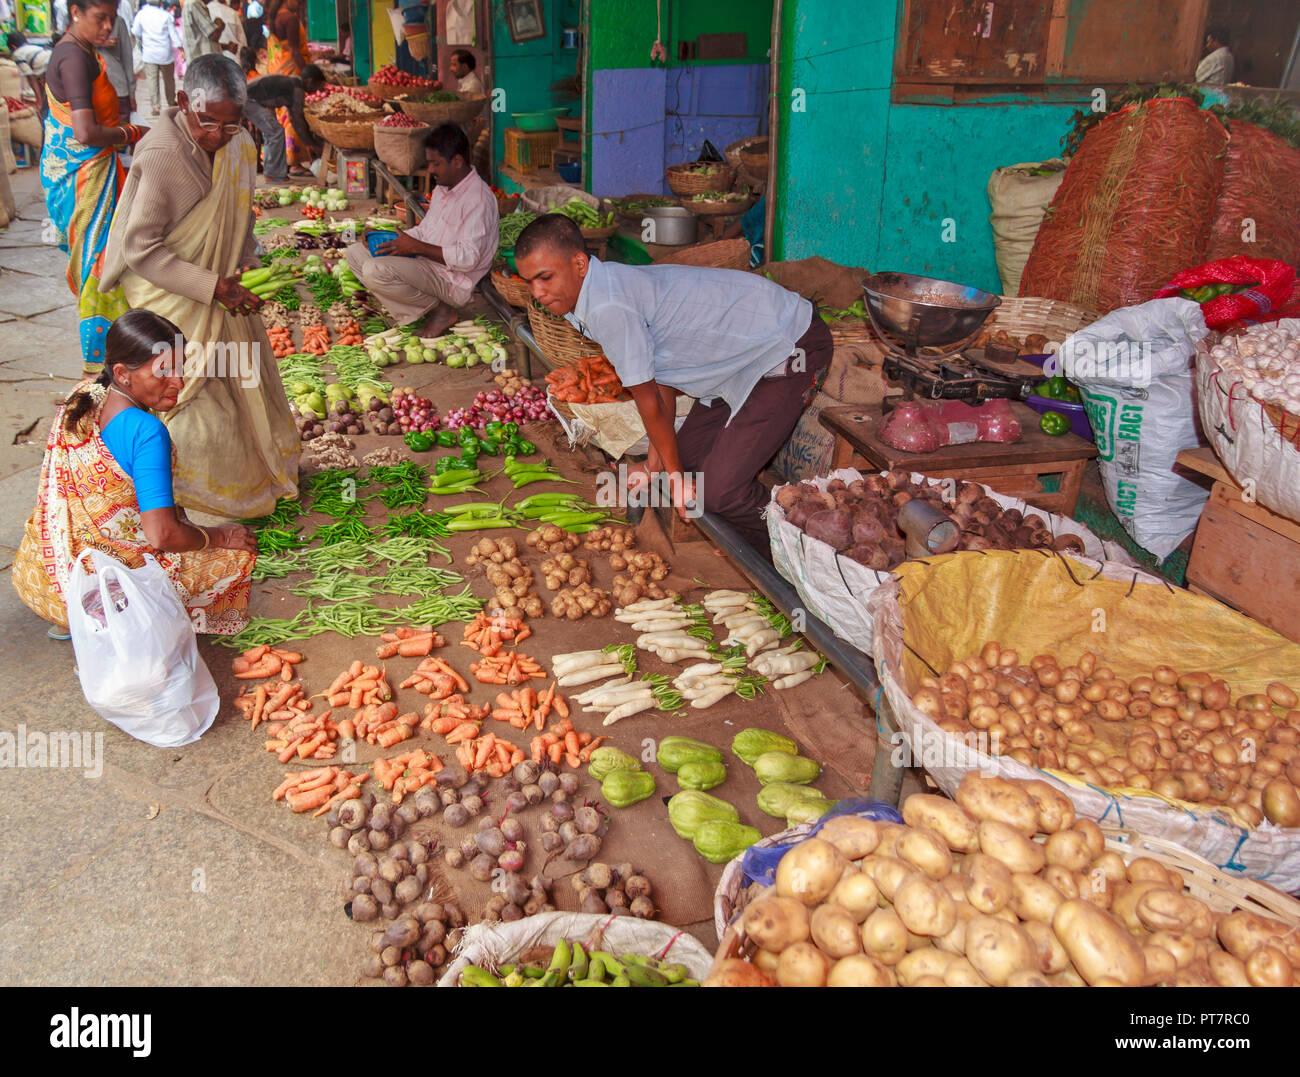 SHOPPING AT A VEGETABLE STALL WITH A PLENTIFUL SELECTION INDIA Stock Photo